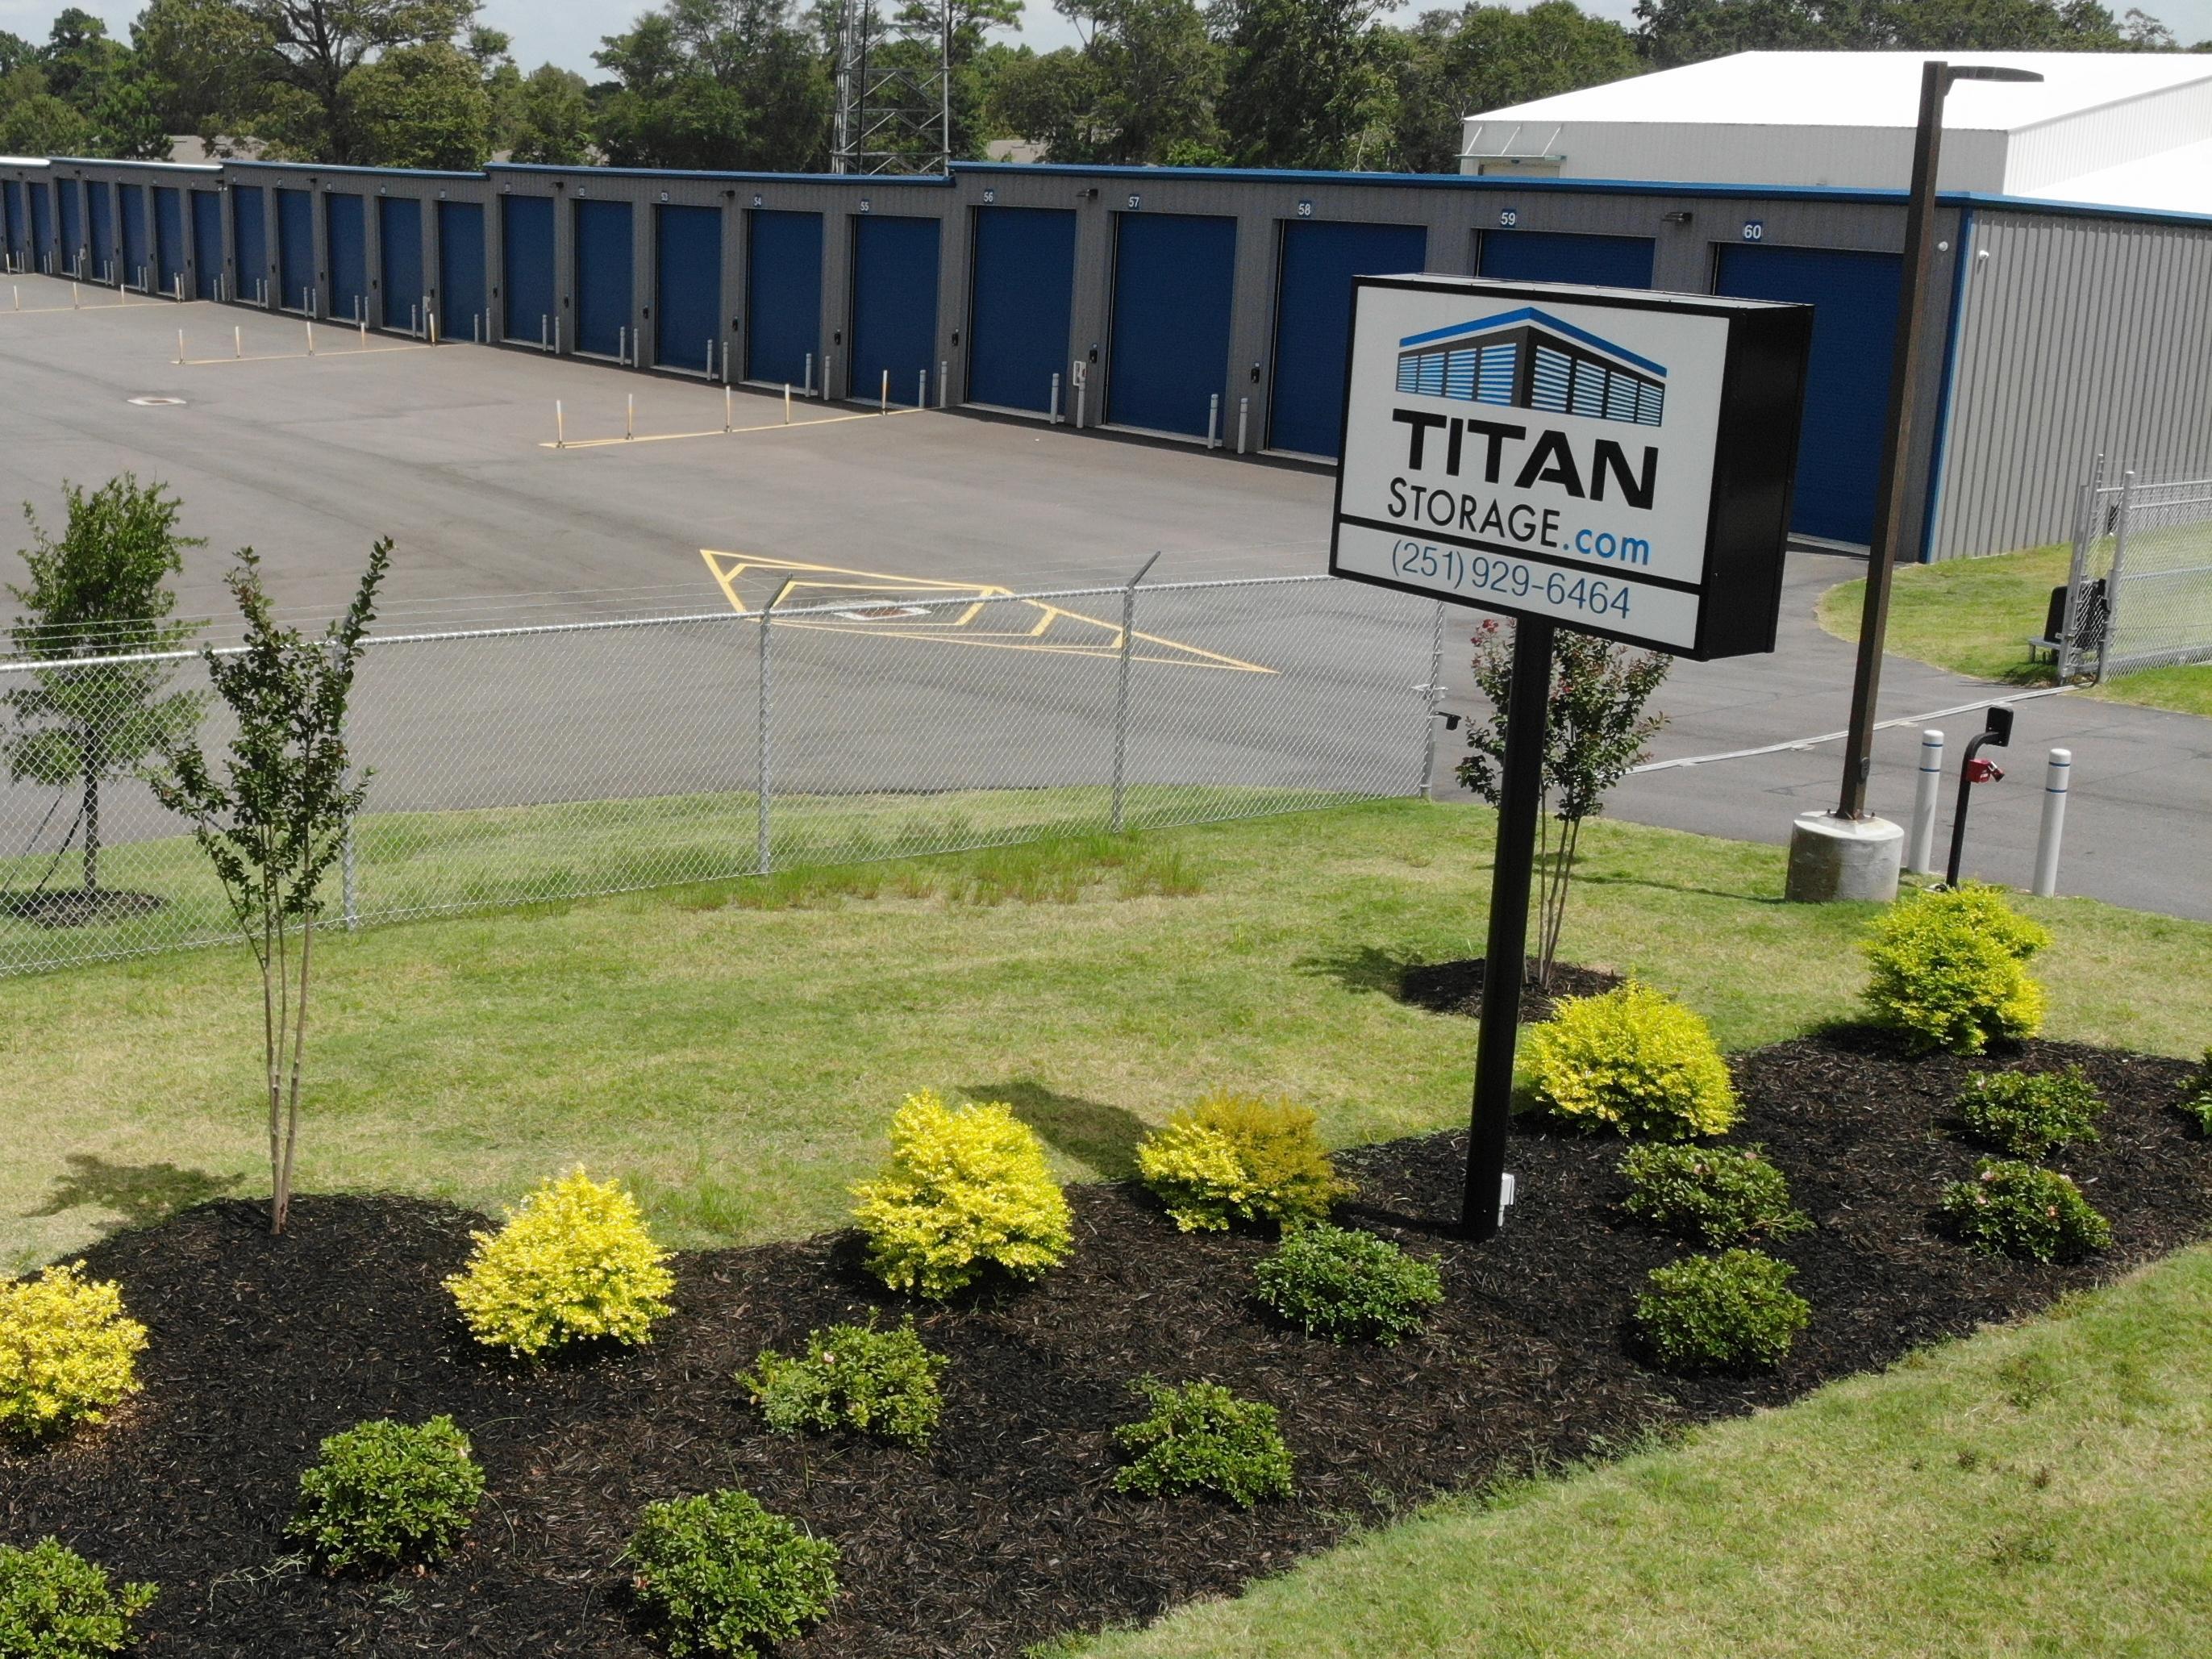 GET IN TOUCH WITH TITAN STORAGE FOR YOUR Daphne, AL CLASSIC CAR STORAGE UNIT SOLUTION